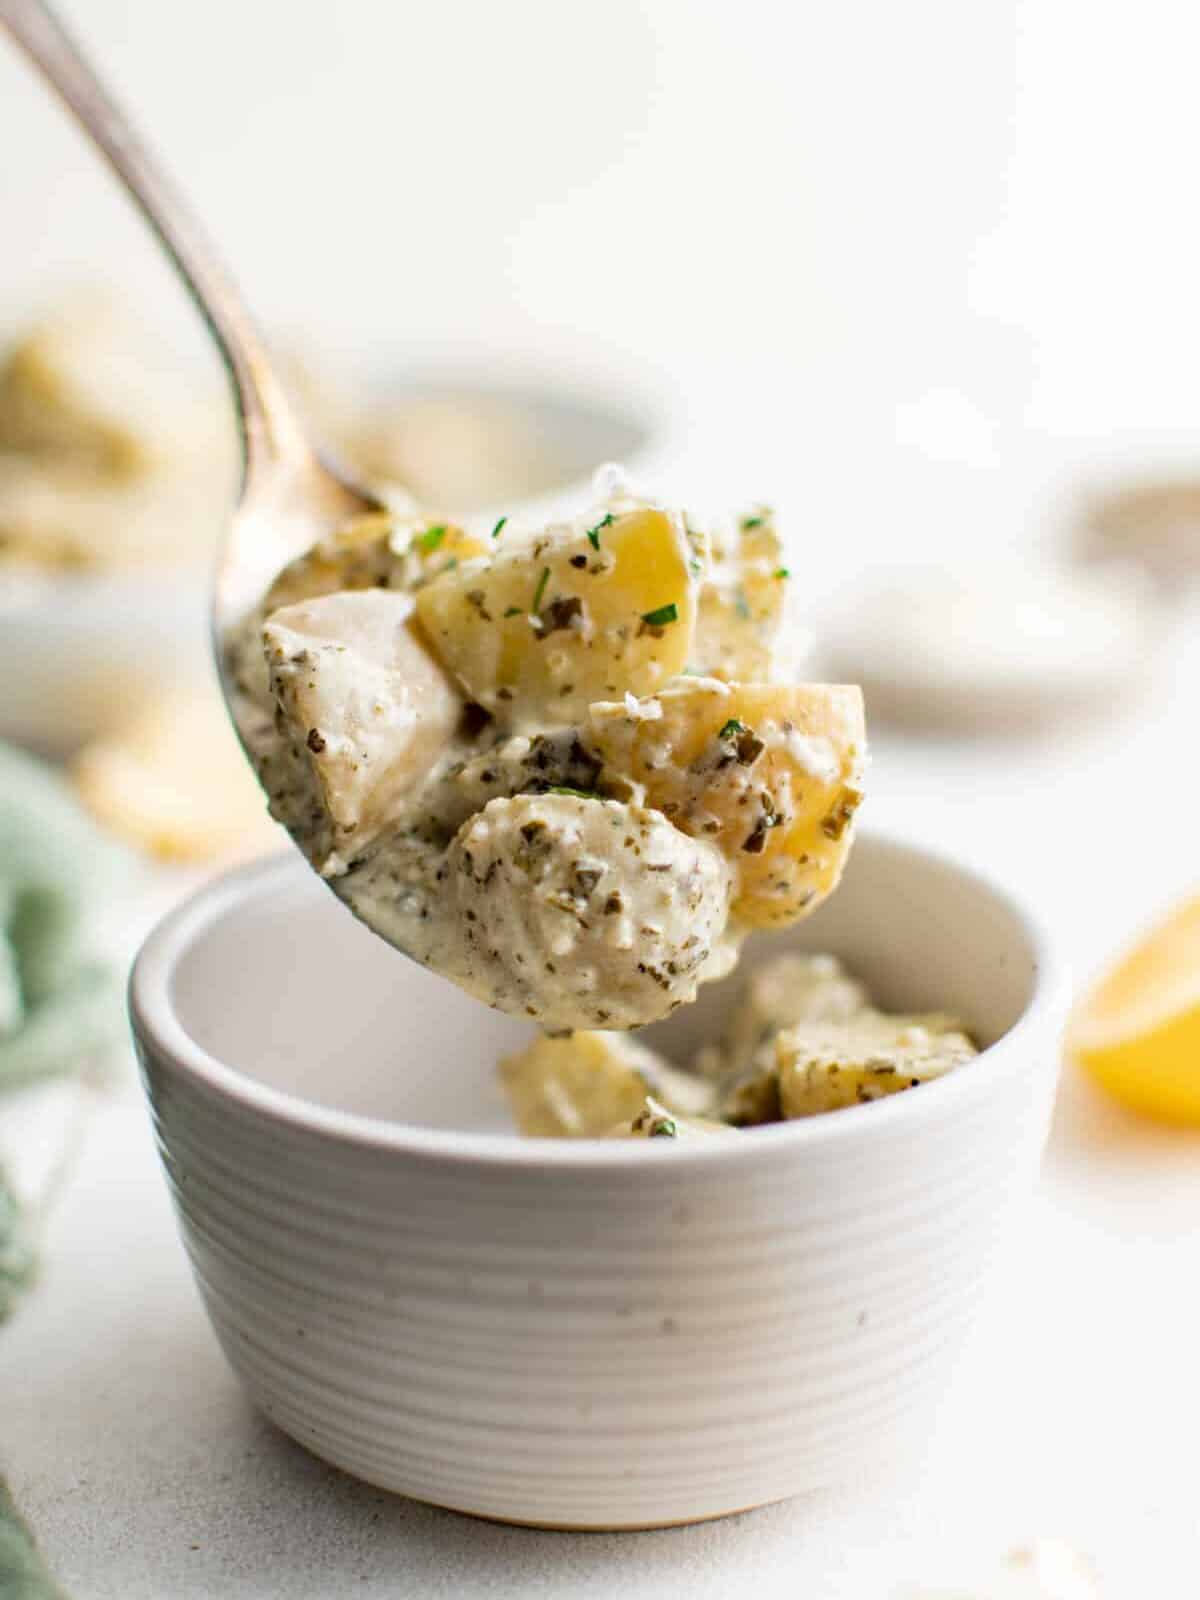 a spoon scooping pesto potato salad from a small white bowl.